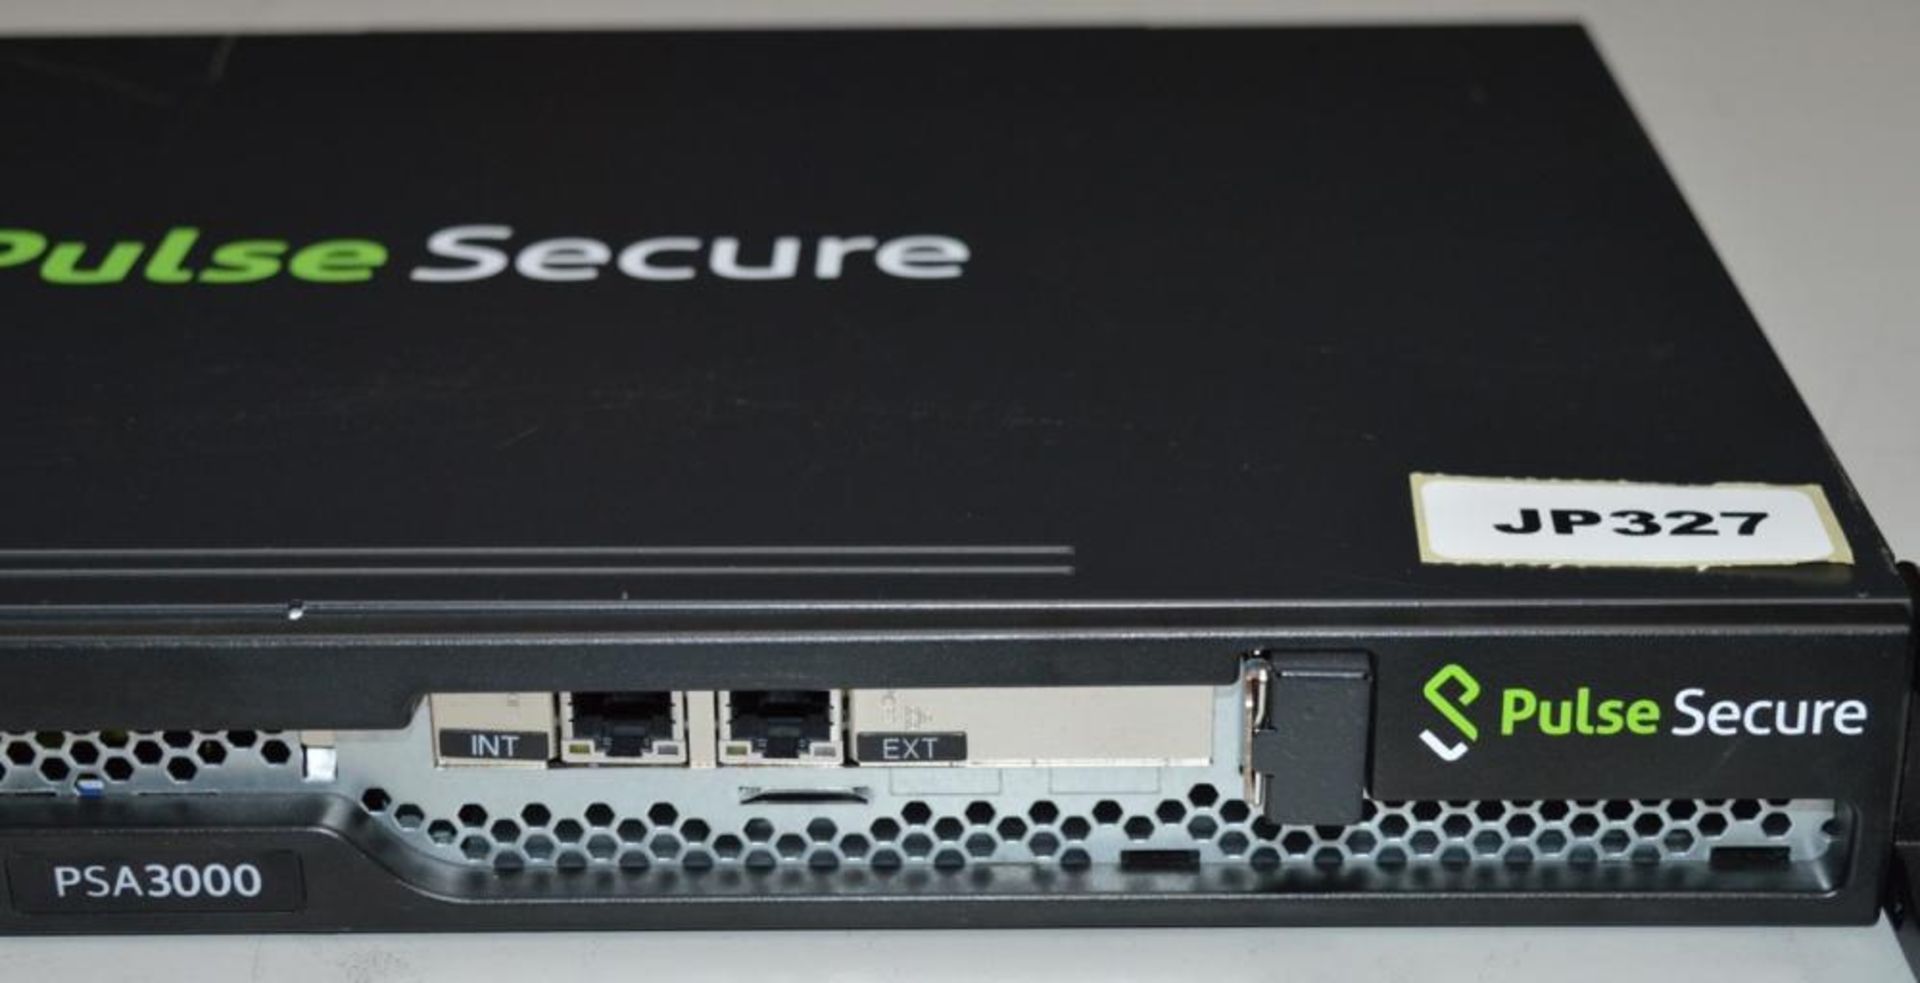 1 x Pulse Secure PSA3000 Security Appliance - CL285 - Ref JP327 F2 - Location: Altrincham WA14 - RRP - Image 2 of 5